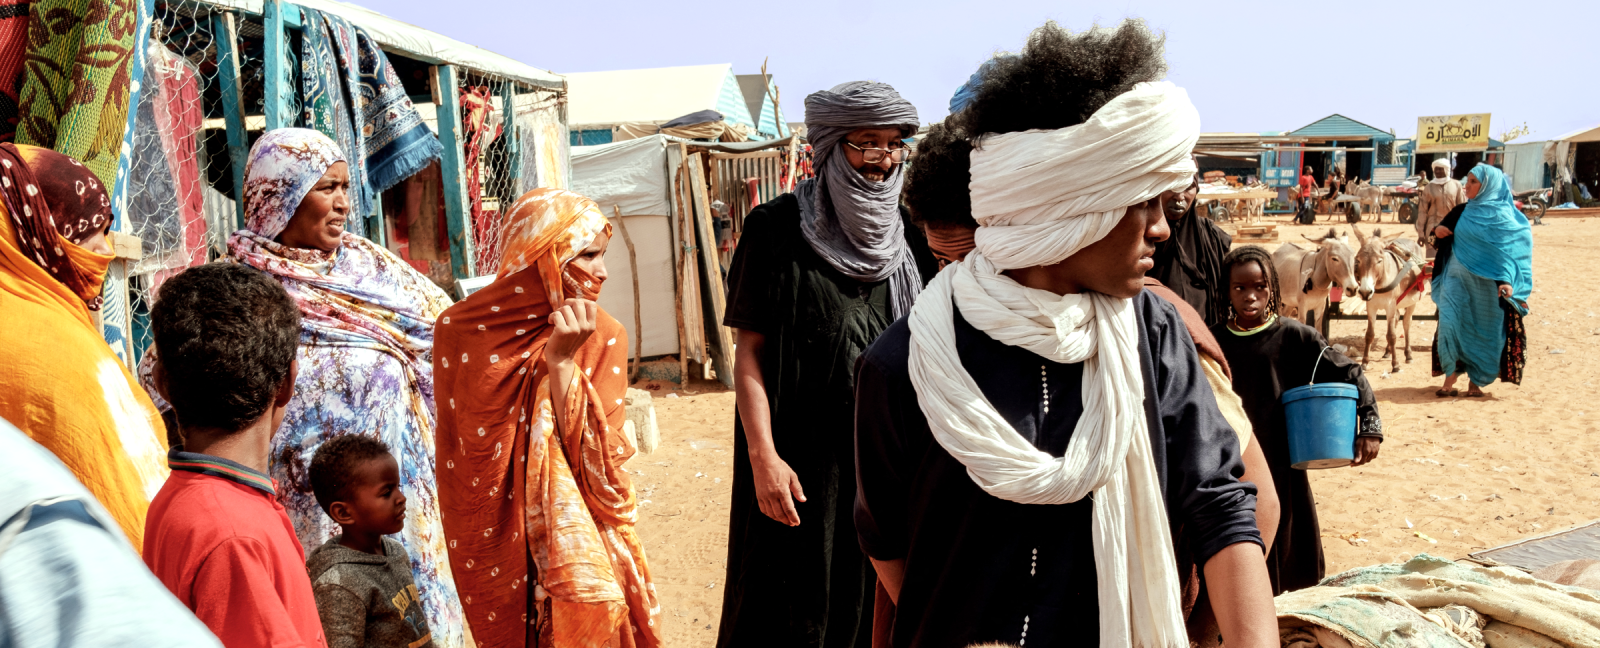 Refugees from the violence in Mali at Mauritania's M'Berra refugee camp.